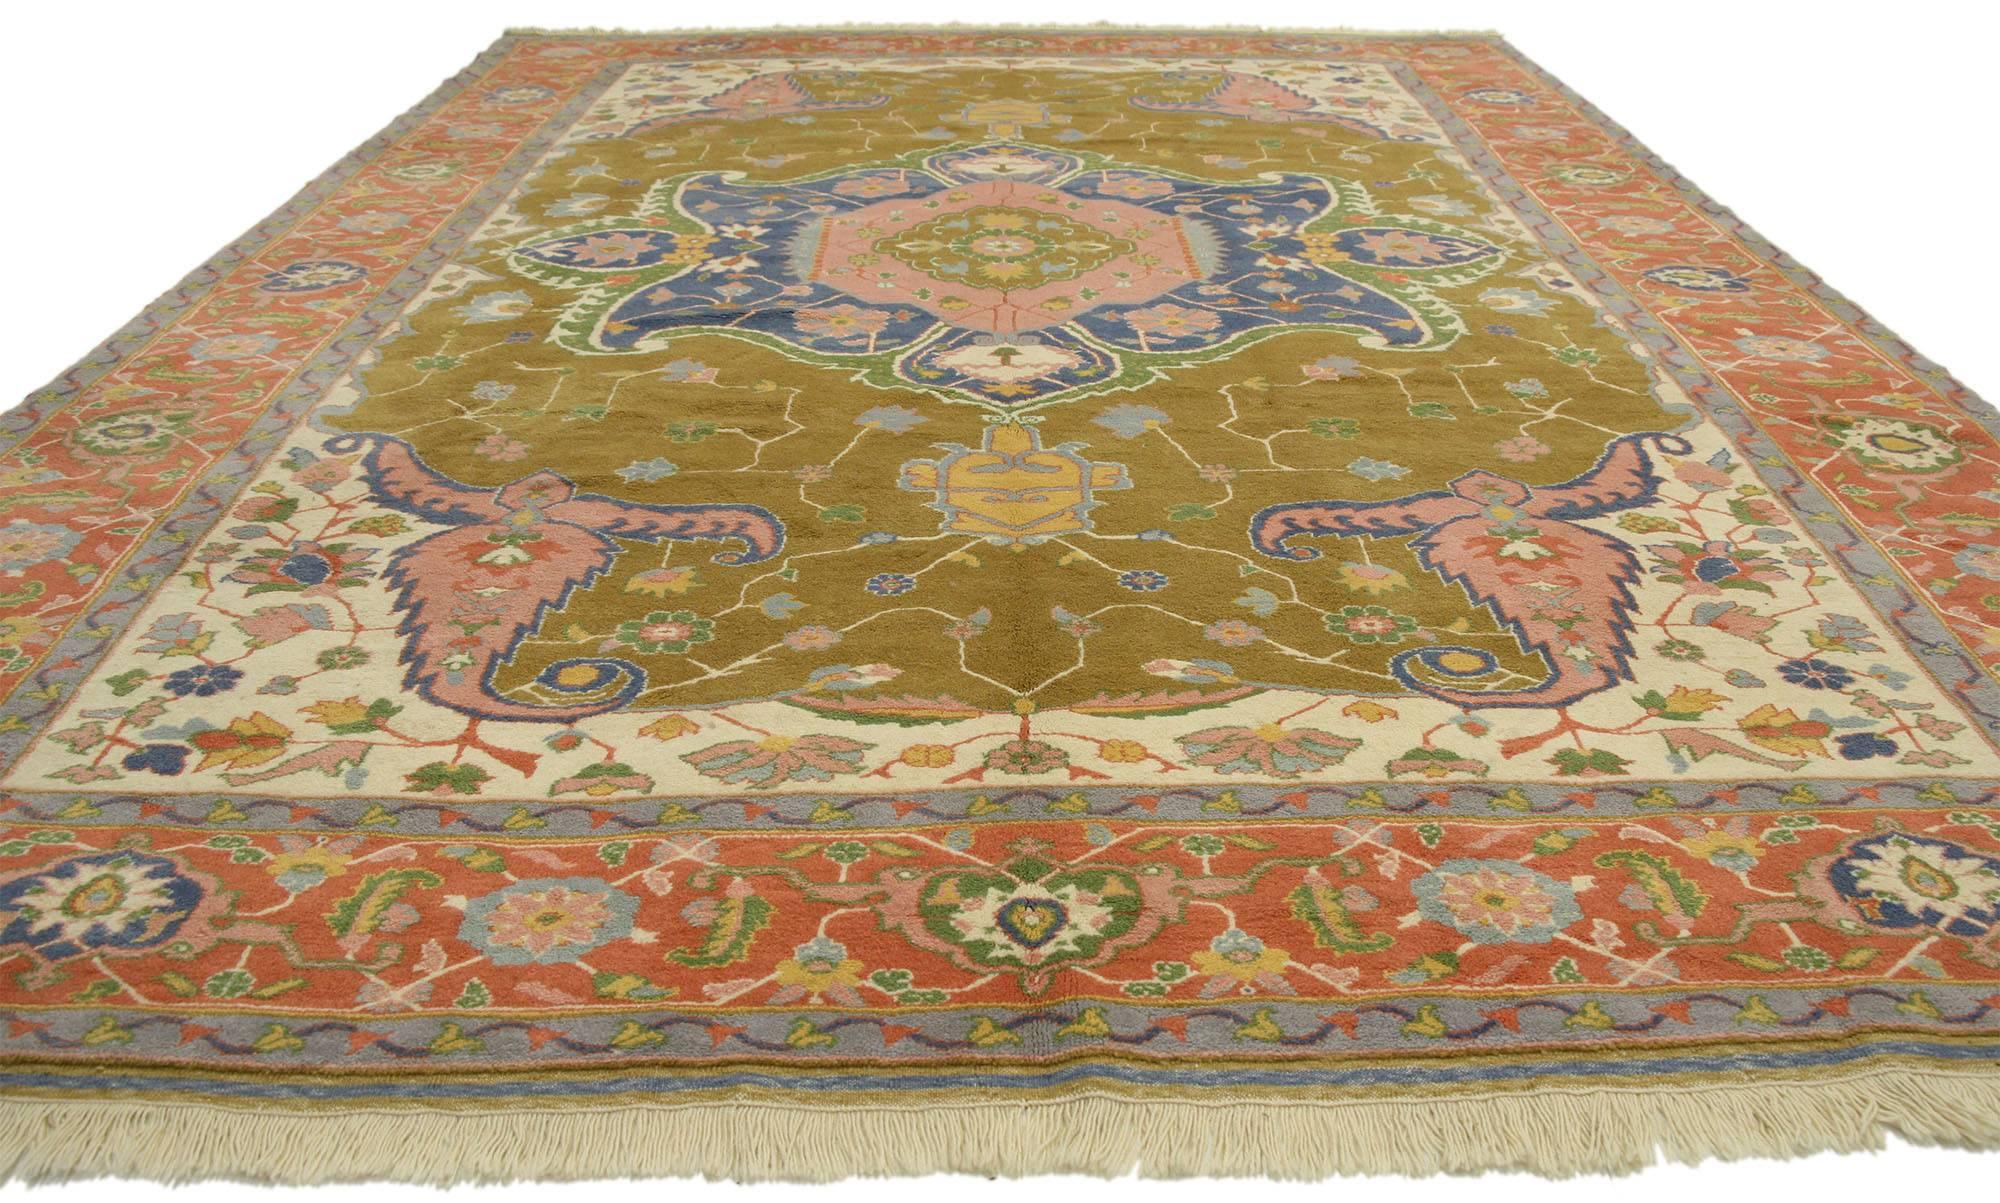 77115 vintage Turkish Oushak Anatolian rug with Retro Bohemian Mediterranean style. This hand knotted wool vintage Turkish Oushak Anatolian rug features an all-over geometric pattern composed of a large scale cusped medallion anchored with palmette